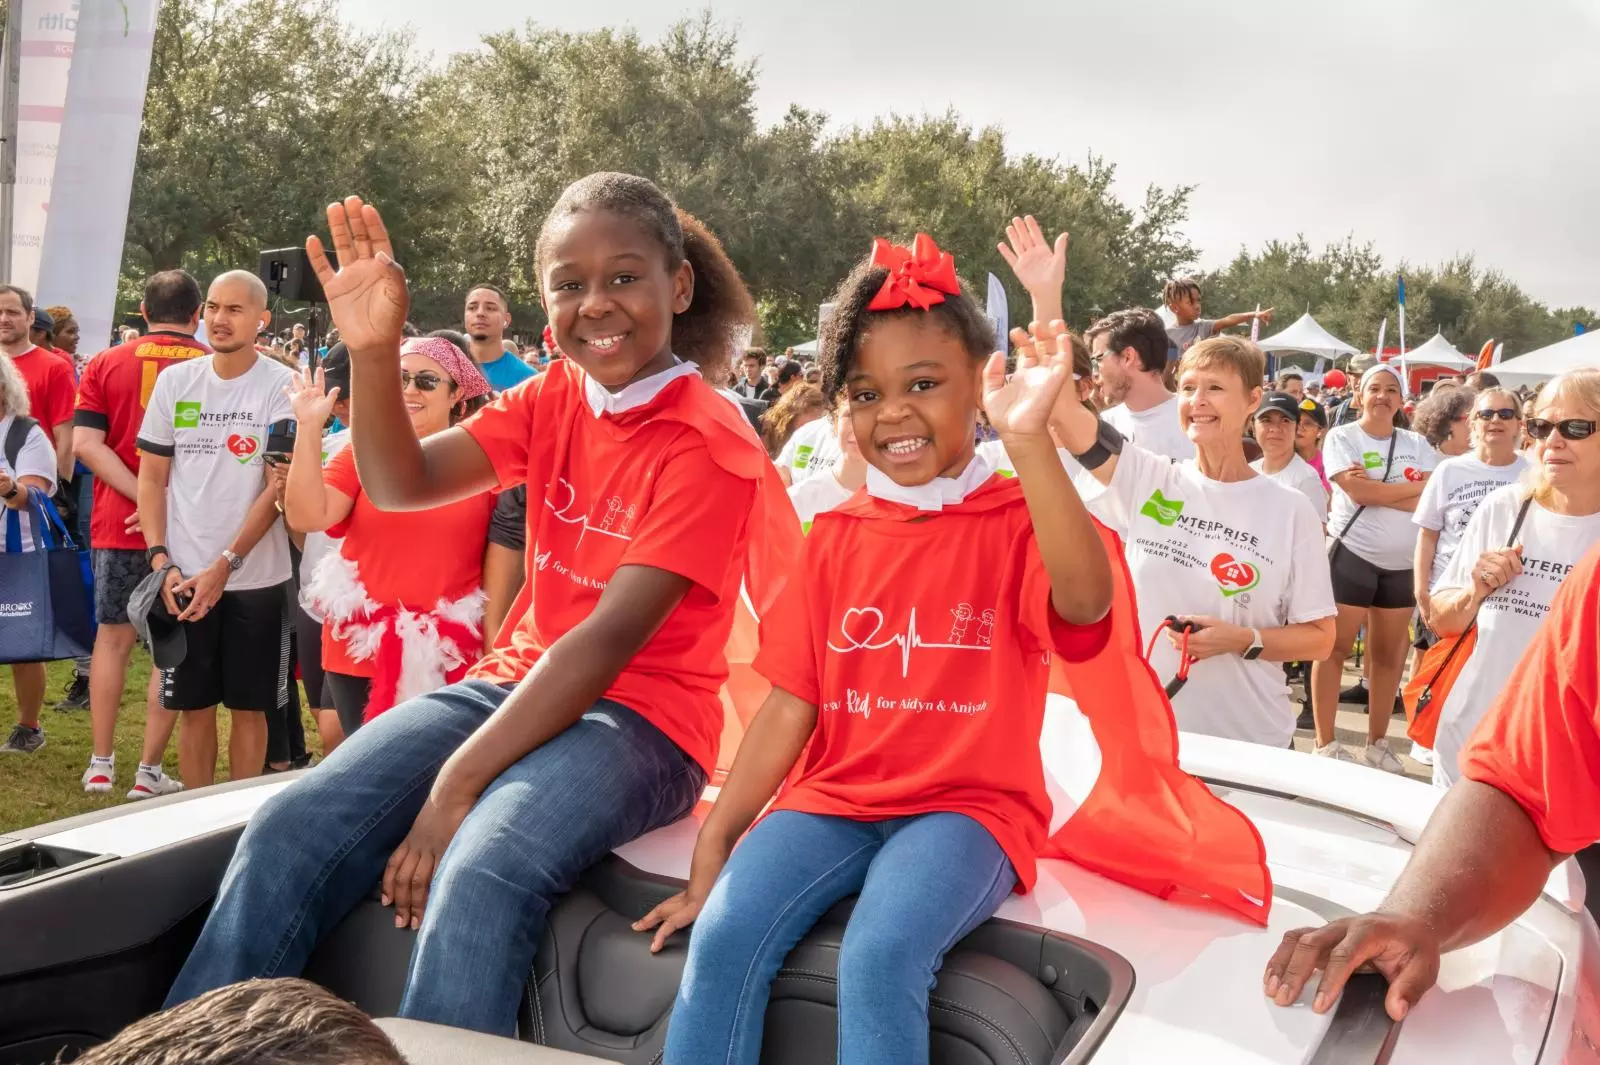 Hopes are the story of AdventHealth for Children patients Aidyn and Aniyah will spur advancing research and treatments for cardiovascular disease.